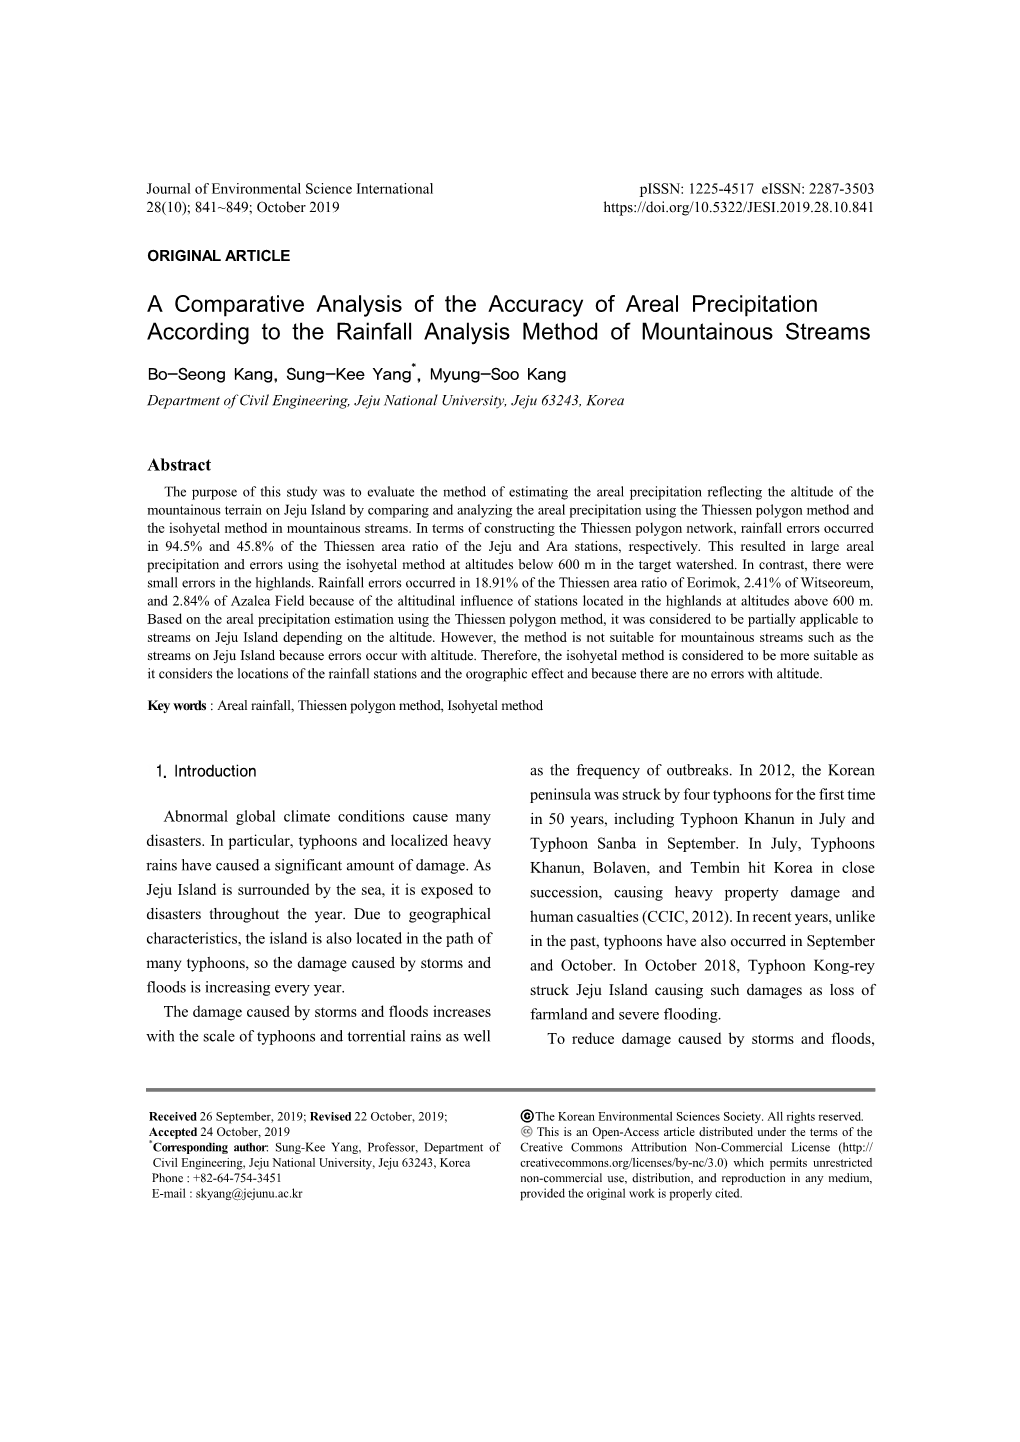 A Comparative Analysis of the Accuracy of Areal Precipitation According to the Rainfall Analysis Method of Mountainous Streams